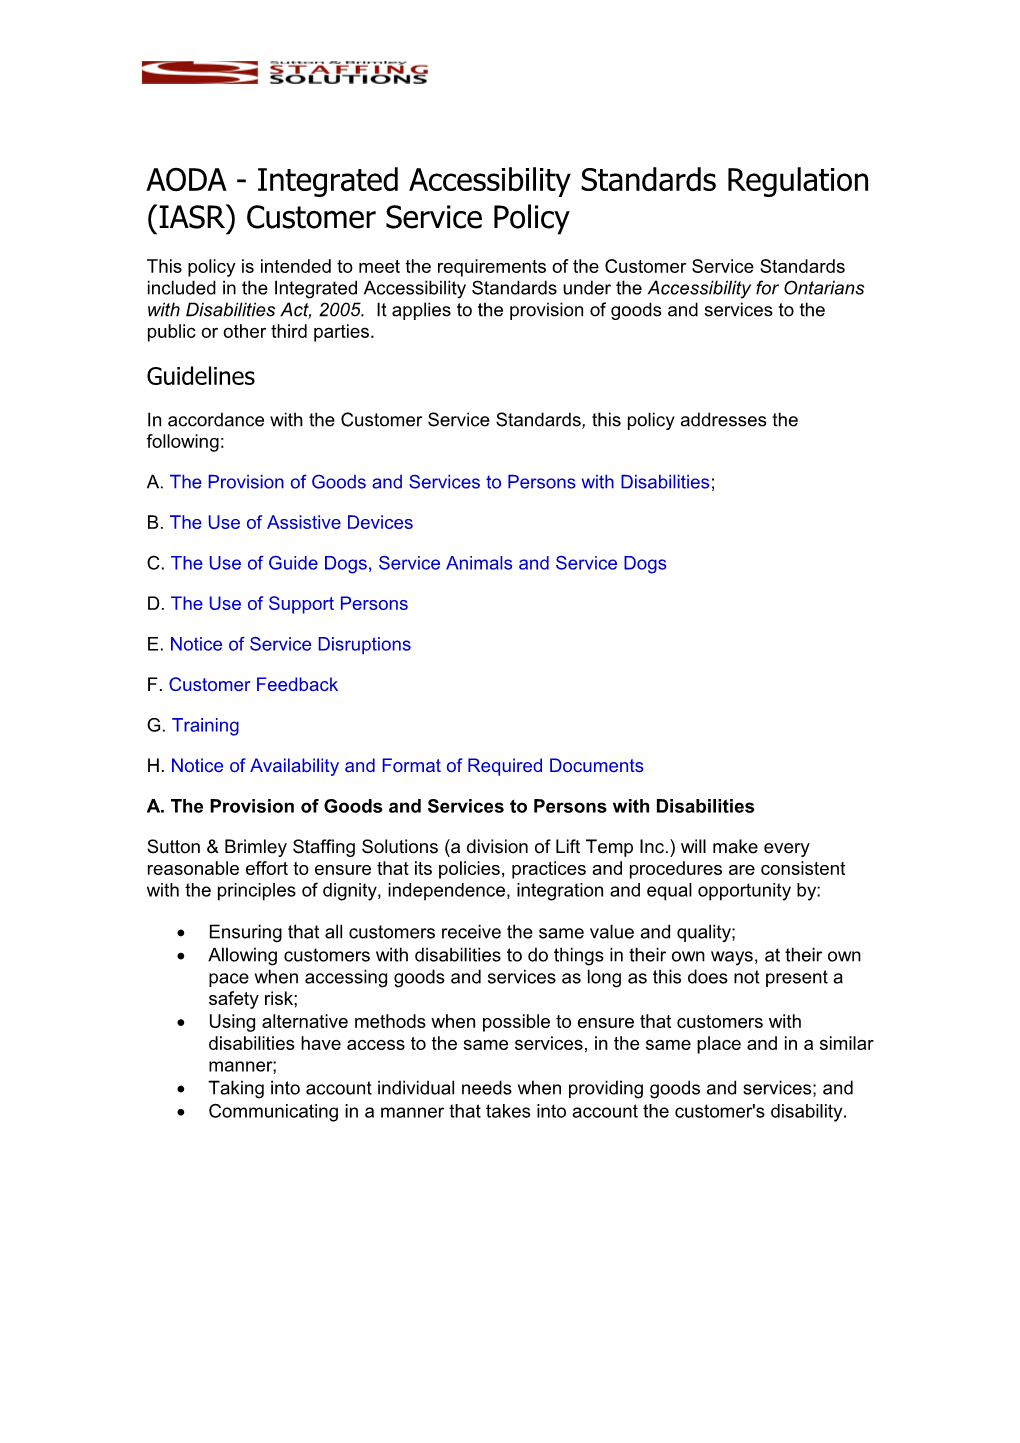 AODA - Integrated Accessibility Standards Regulation (IASR) Customer Service Policy